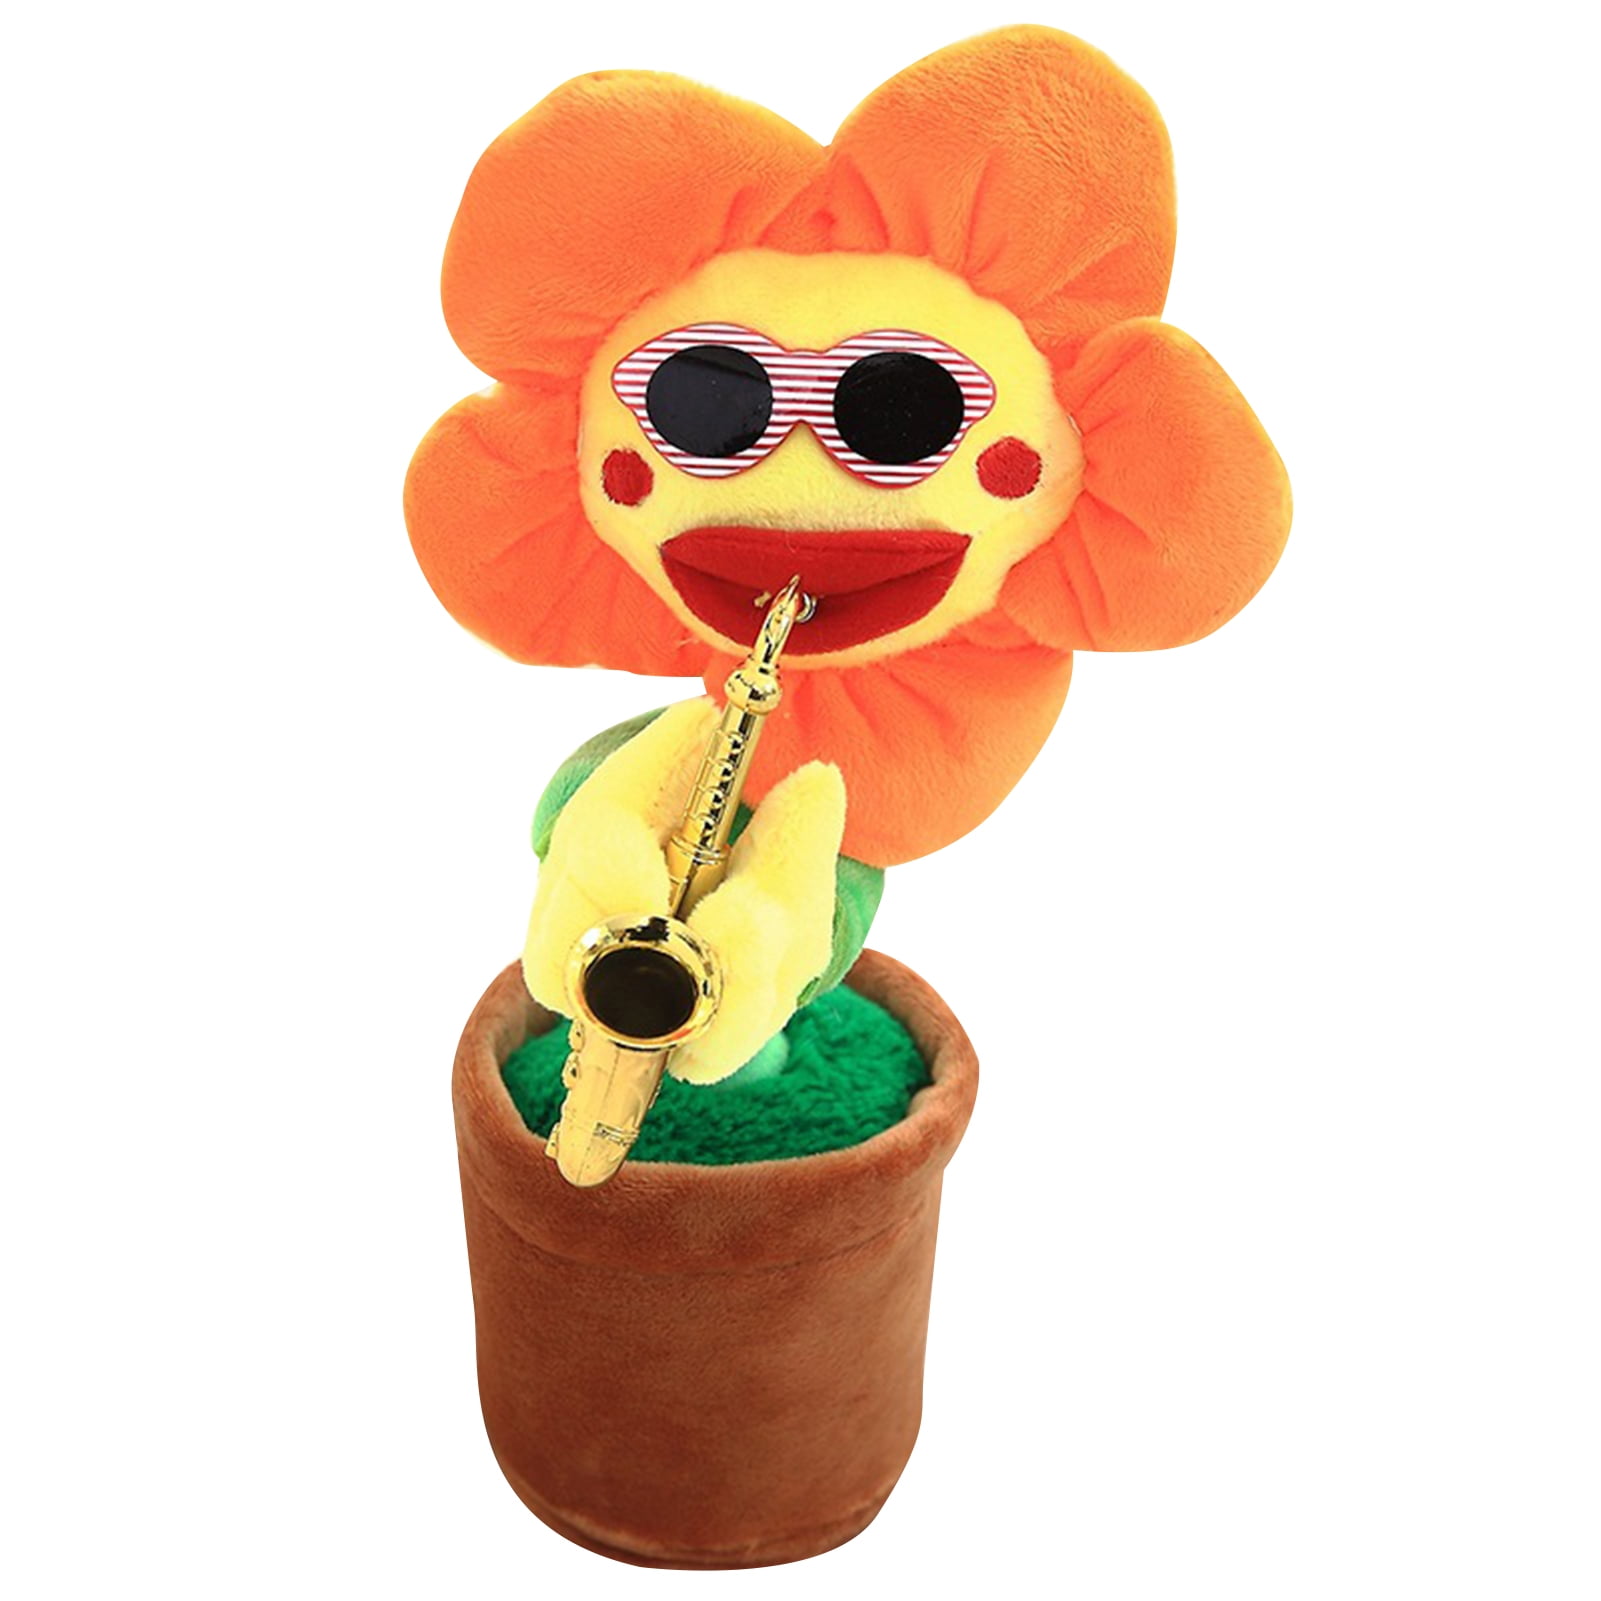 Sing And Dance Sunflower Toy 80 Music With Lights Doll Ornaments